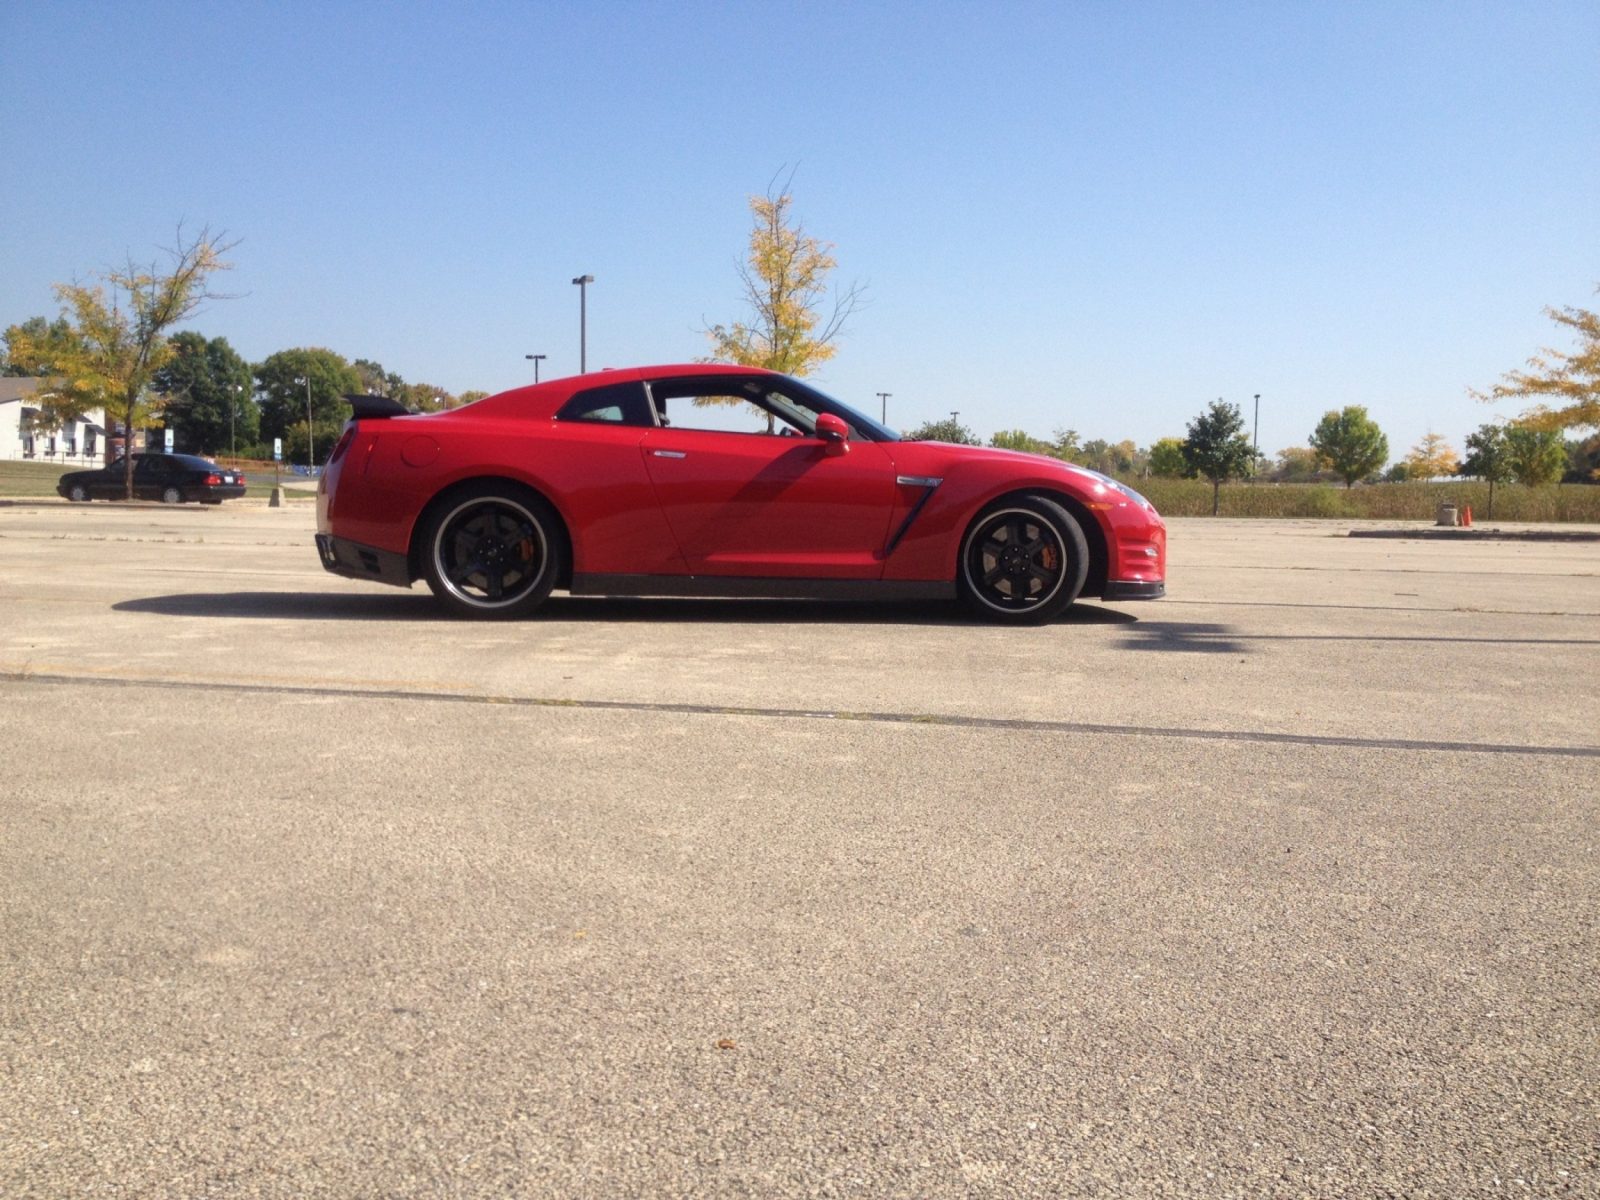 2013 Nissan gt r daily driver #2